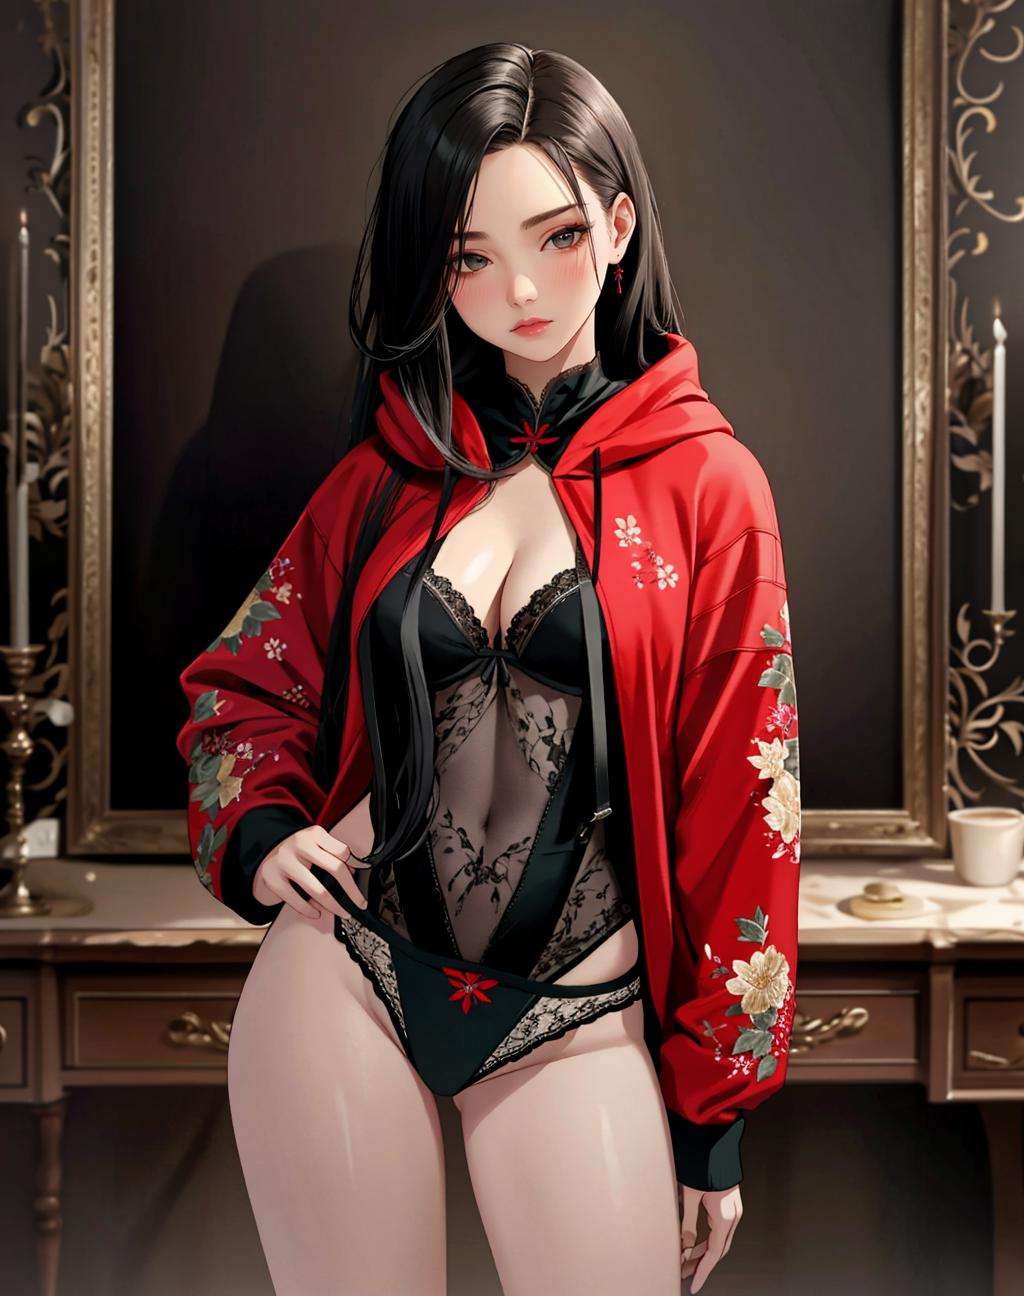 ((Masterpiece, best quality,photography, detailed skin, realistic, photo-realistic, 8k, highly detailed, full length frame, High detail RAW color art, diffused soft lighting, shallow depth of field, sharp focus, hyperrealism, cinematic lighting,close up))hoodie,edgCoquine, a woman in a ((black lingerie))_hoodie posing for a picture ,wearing edgCoquine_hoodie, red floral embroidery, <lora:CoquineHoodies:0.8>